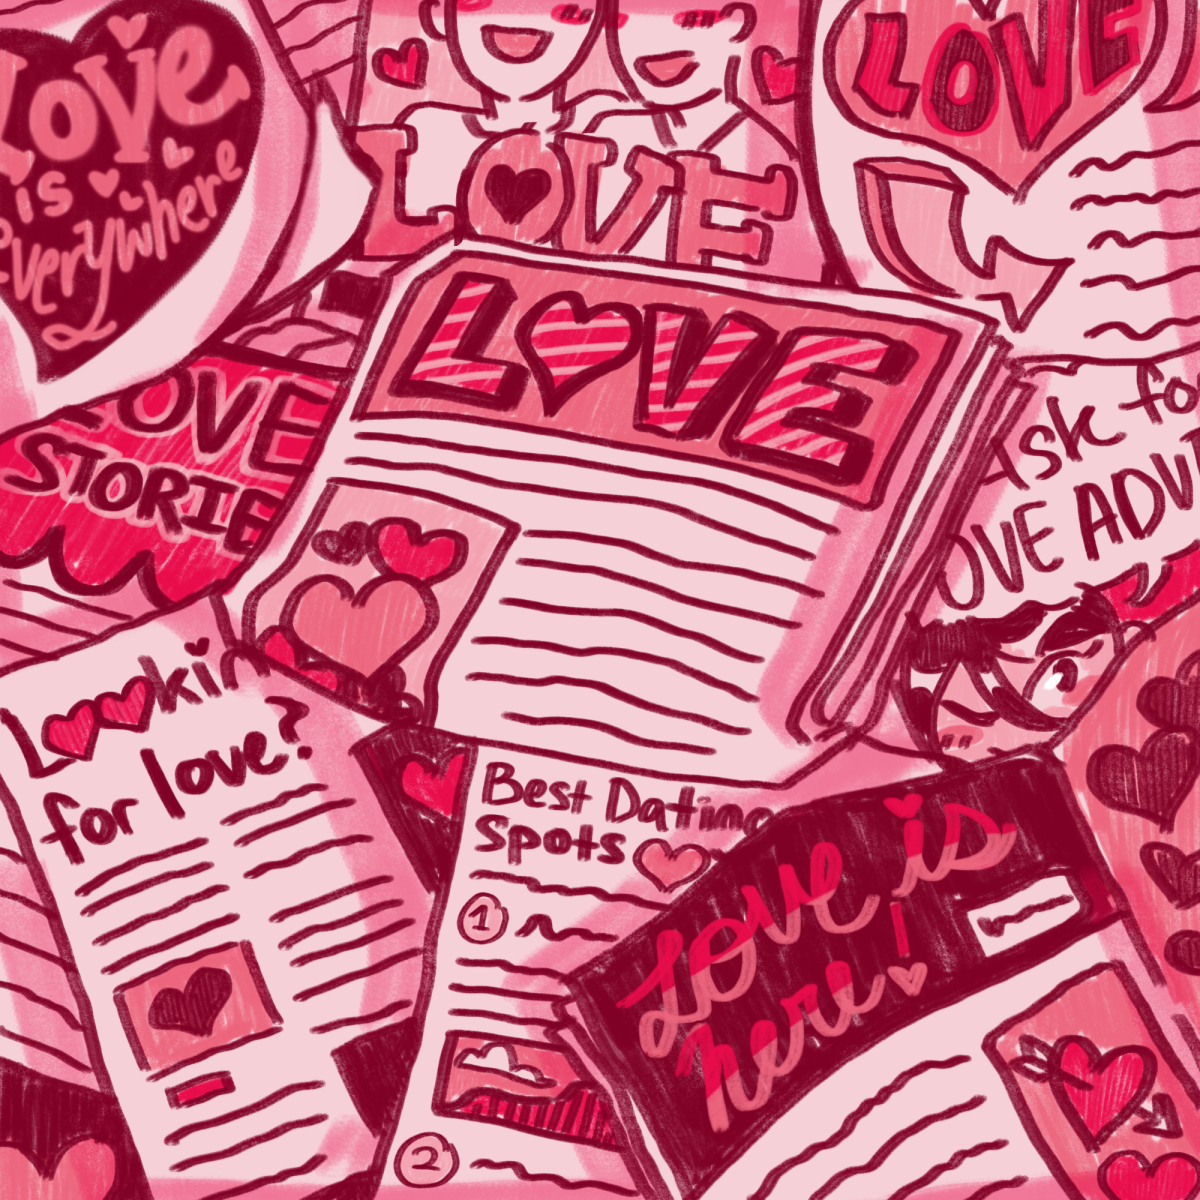 4 insightful articles about love to read this Valentine’s Day